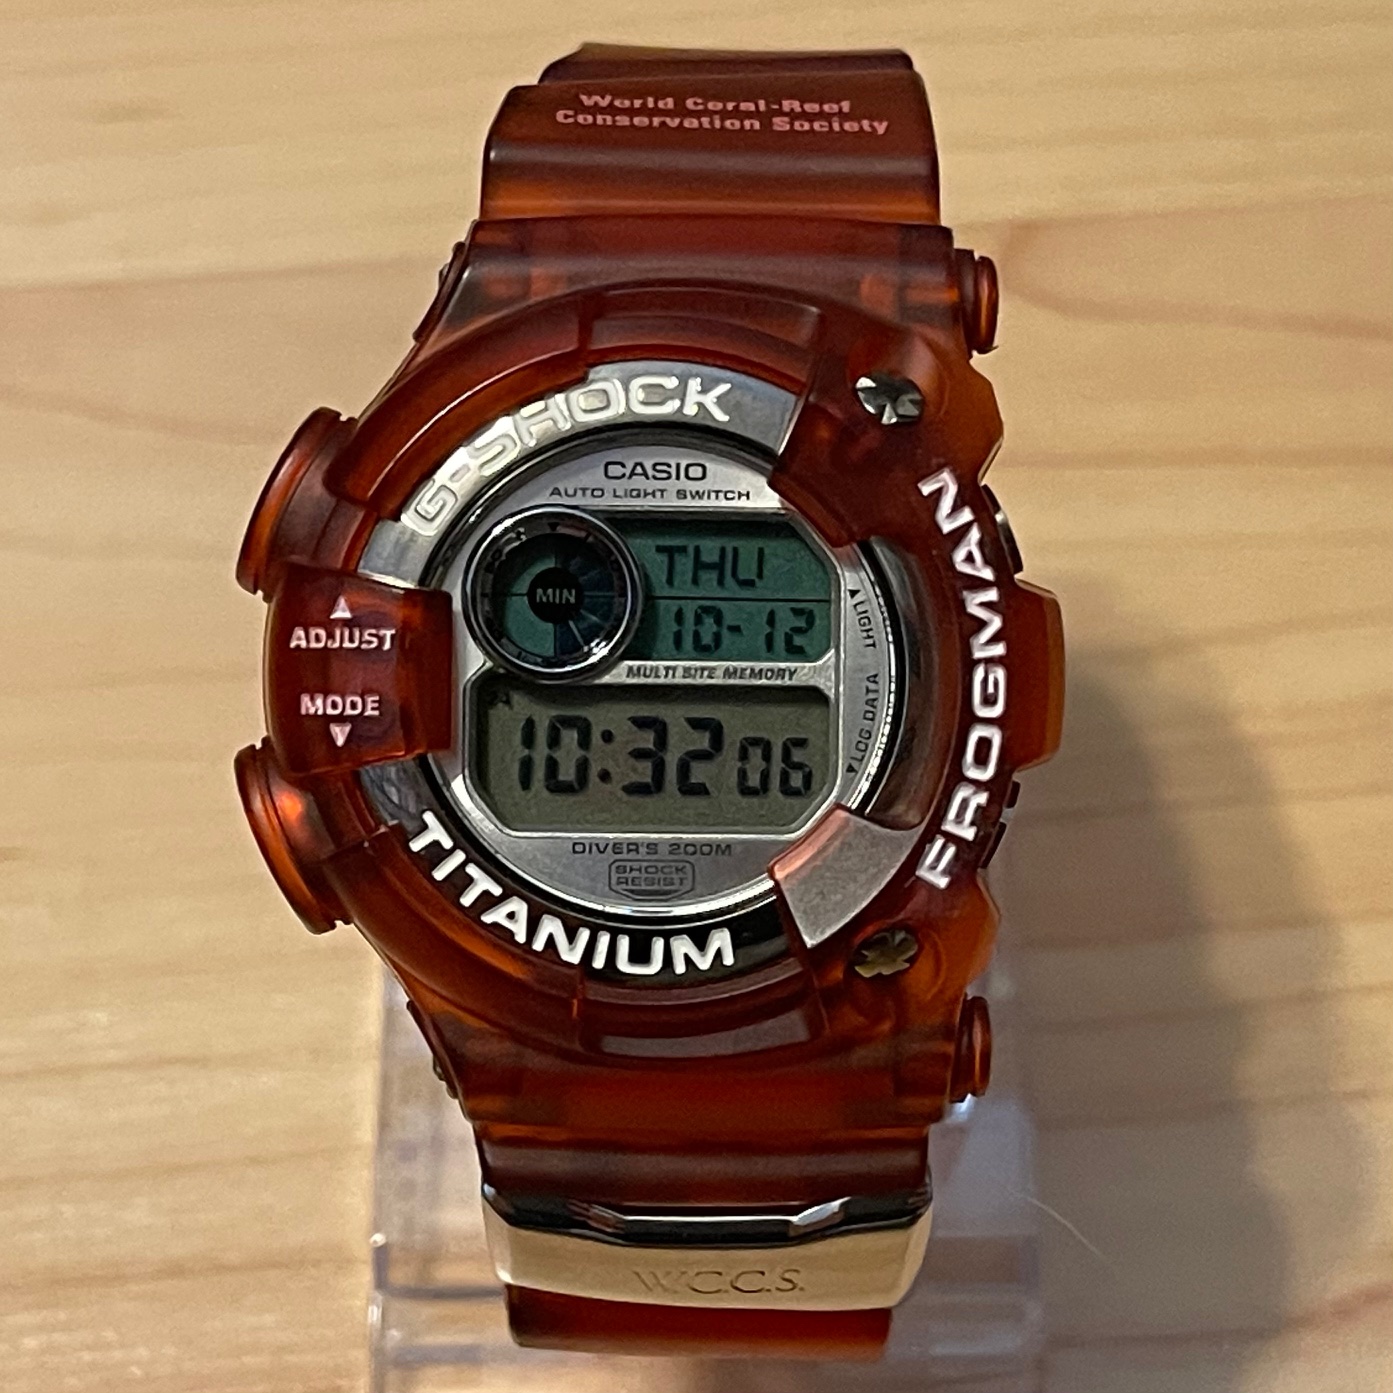 [WTS] Casio G-Shock DW-9900WC-7T WCCS Candy Apple Red 